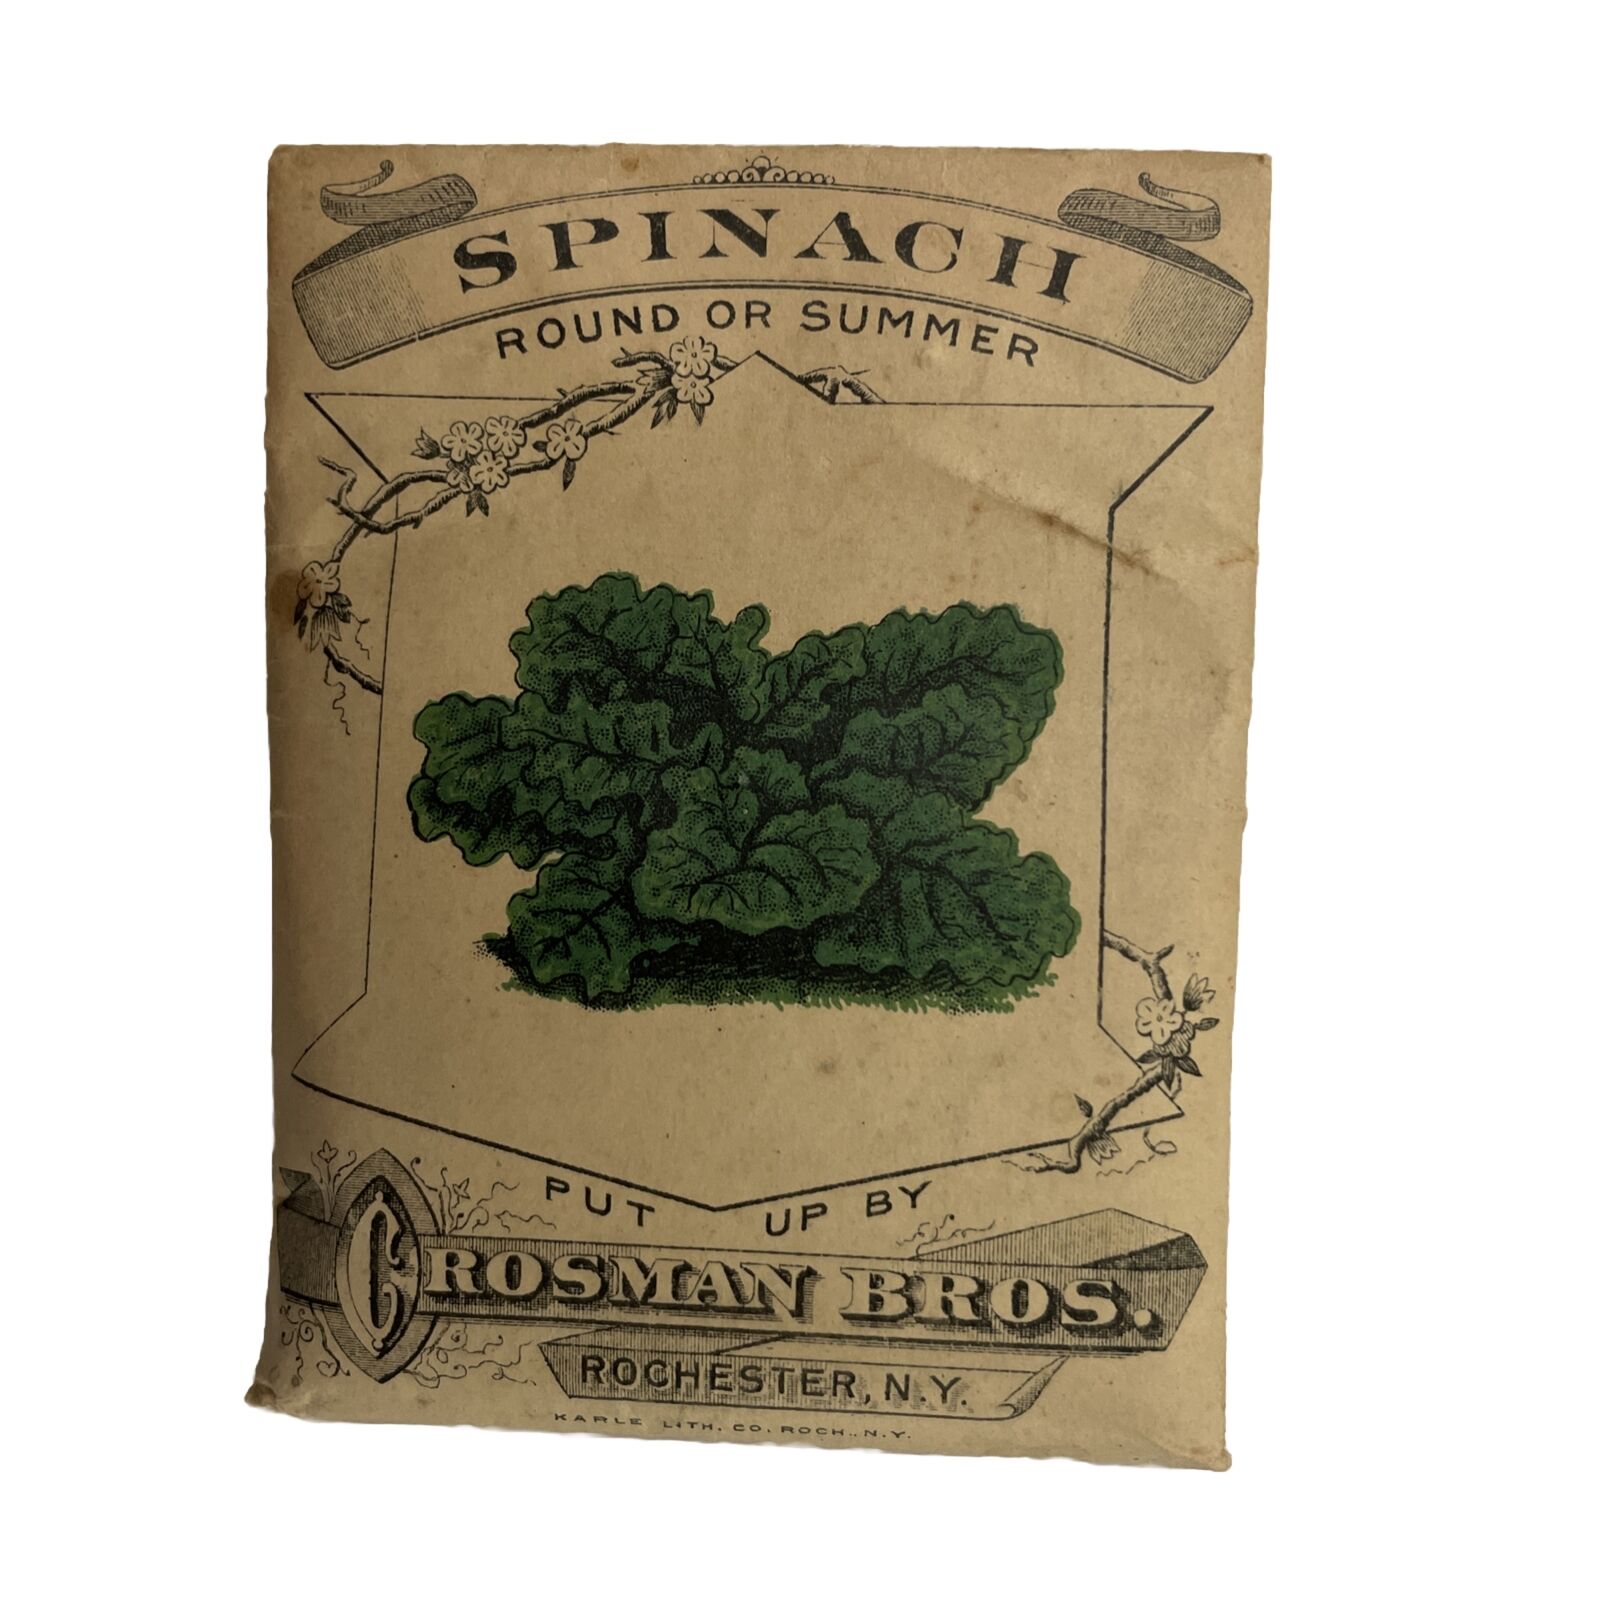 RARE NOS Antique Crosman Bros. Round or Summer Spinach Seed Packet w/ Seeds